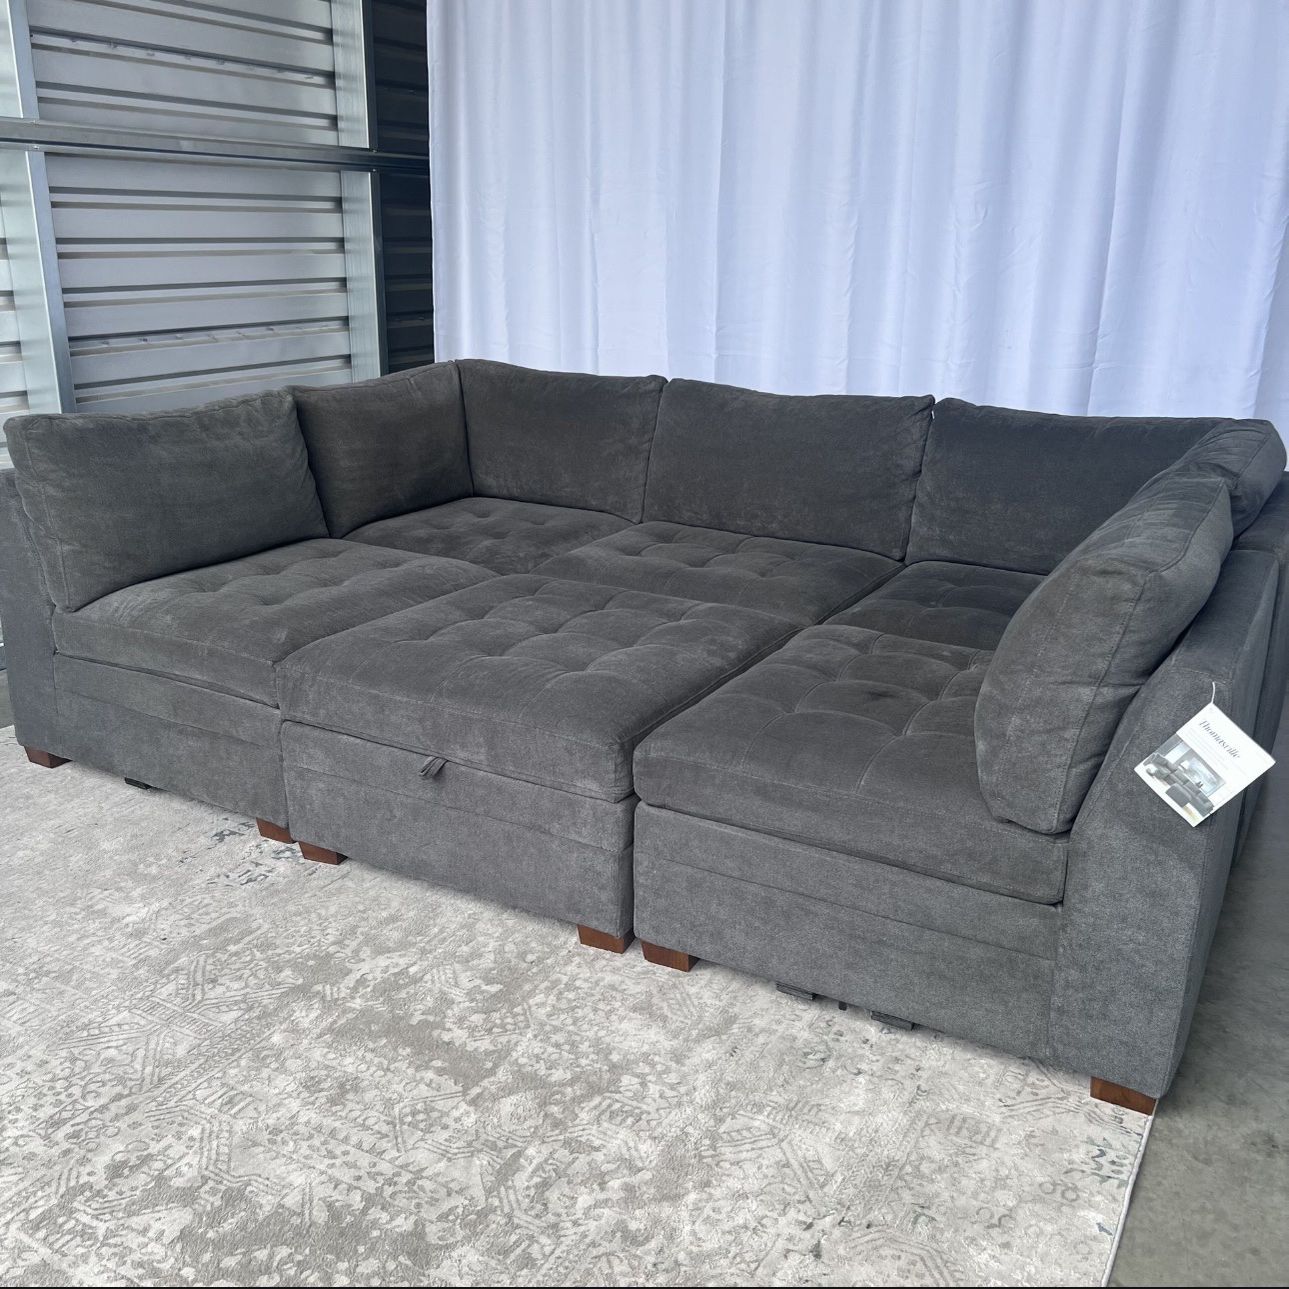 Modular Sectional Couch 